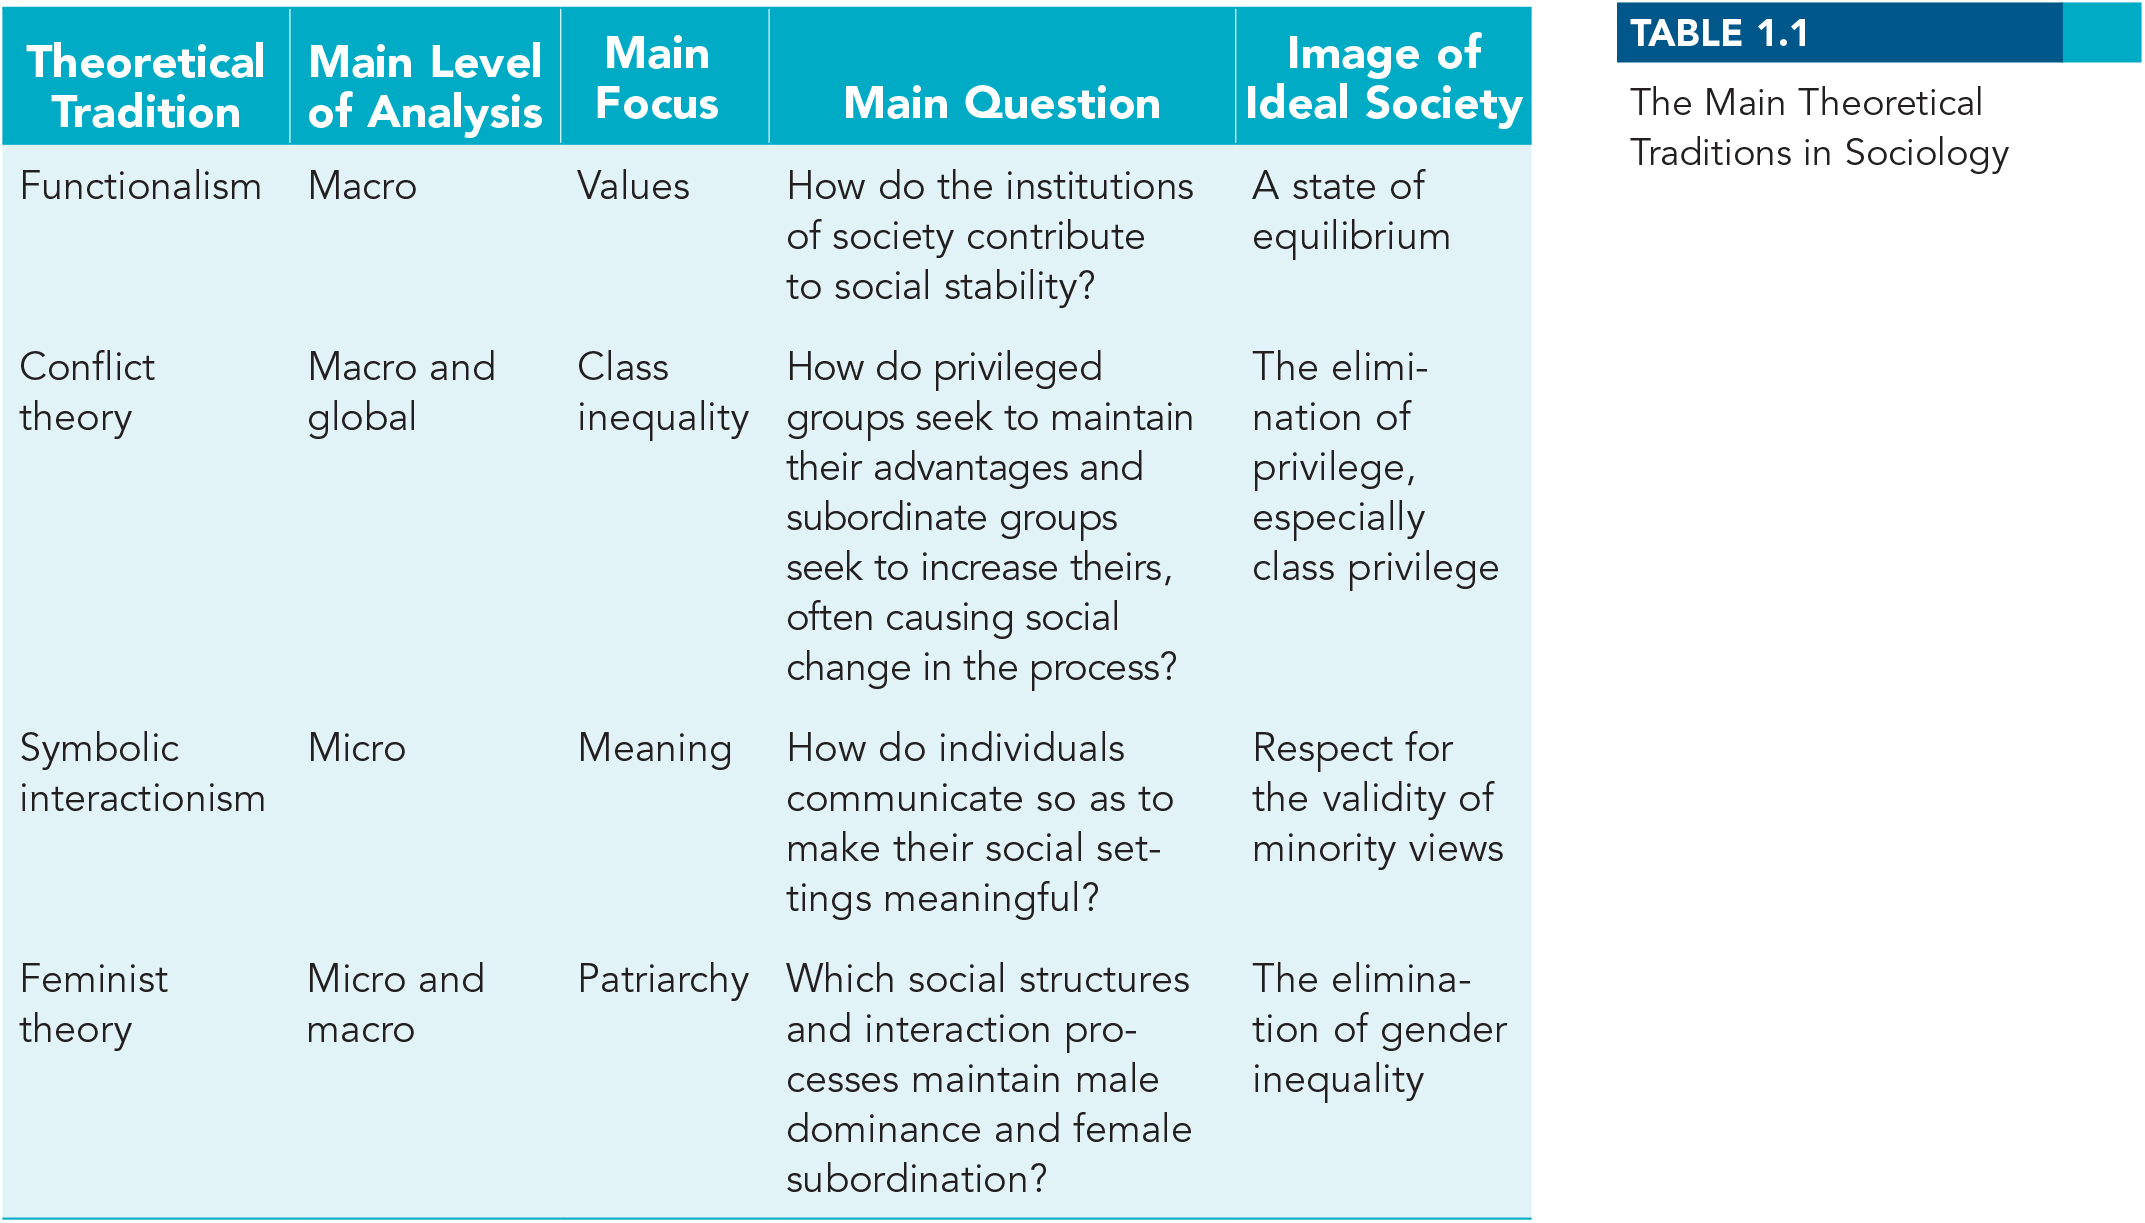 Main Theoretical Traditions in Sociology